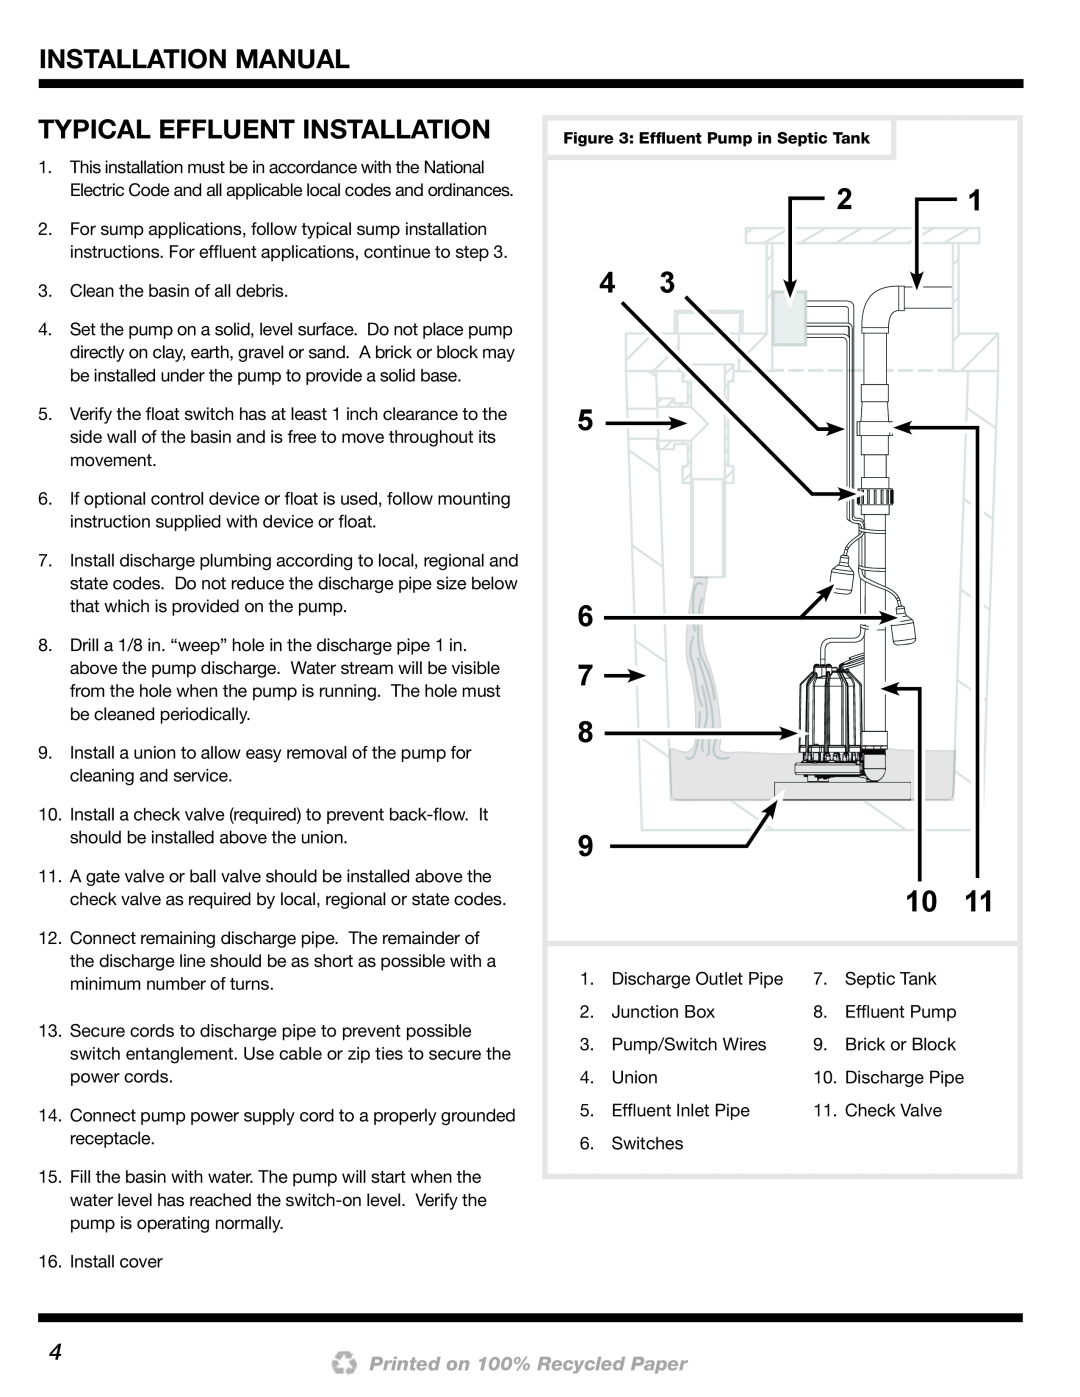 Wayne 200000-015 Installation Manual Typical Effluent Installation, 2 4 5, Printed on 100% Recycled Paper 